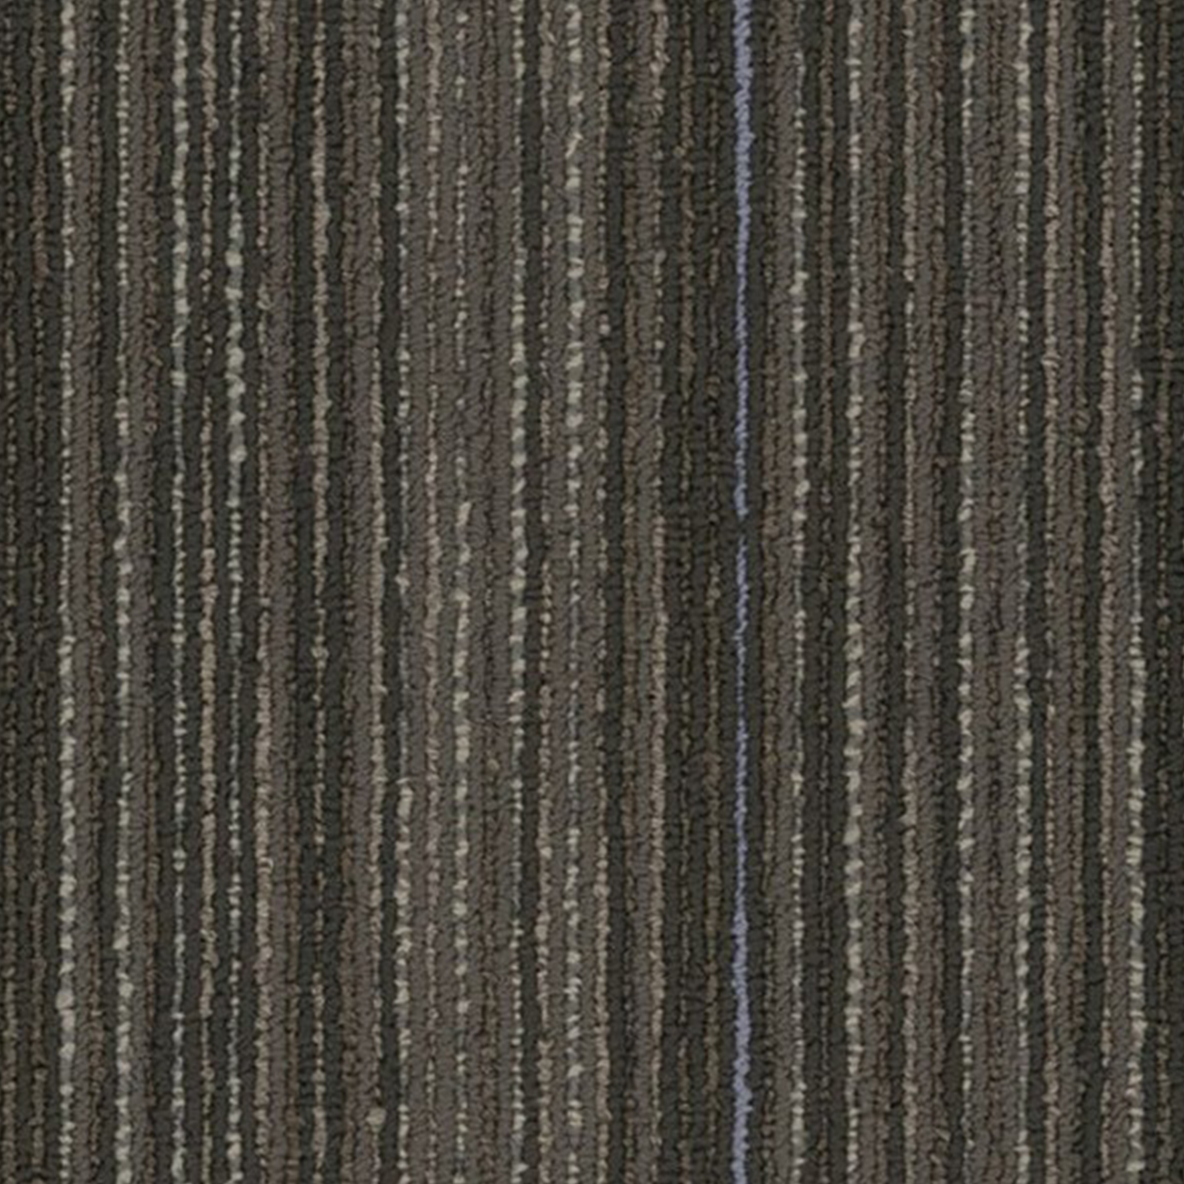 Cutting Edge color close up Higher Calling Commercial Carpet Plank .23 Inch x 9x36 Inches 20 per Carton